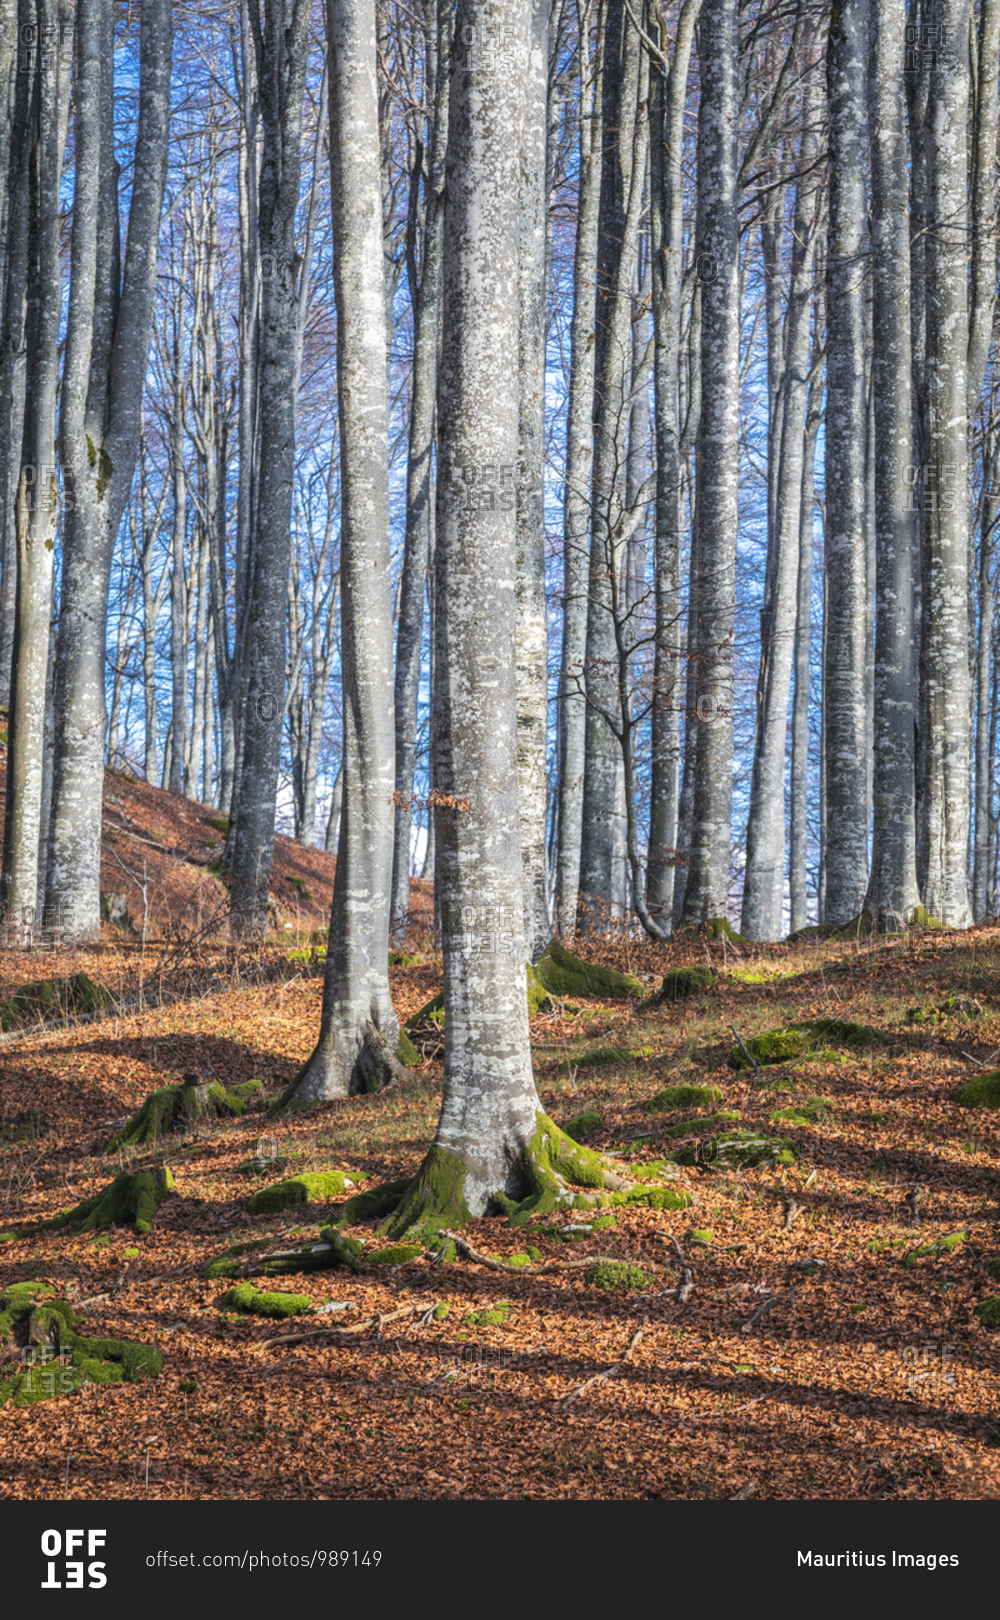 Beech forest in winter with bare trees, cansiglio plateau, province of Treviso, Veneto, Italy